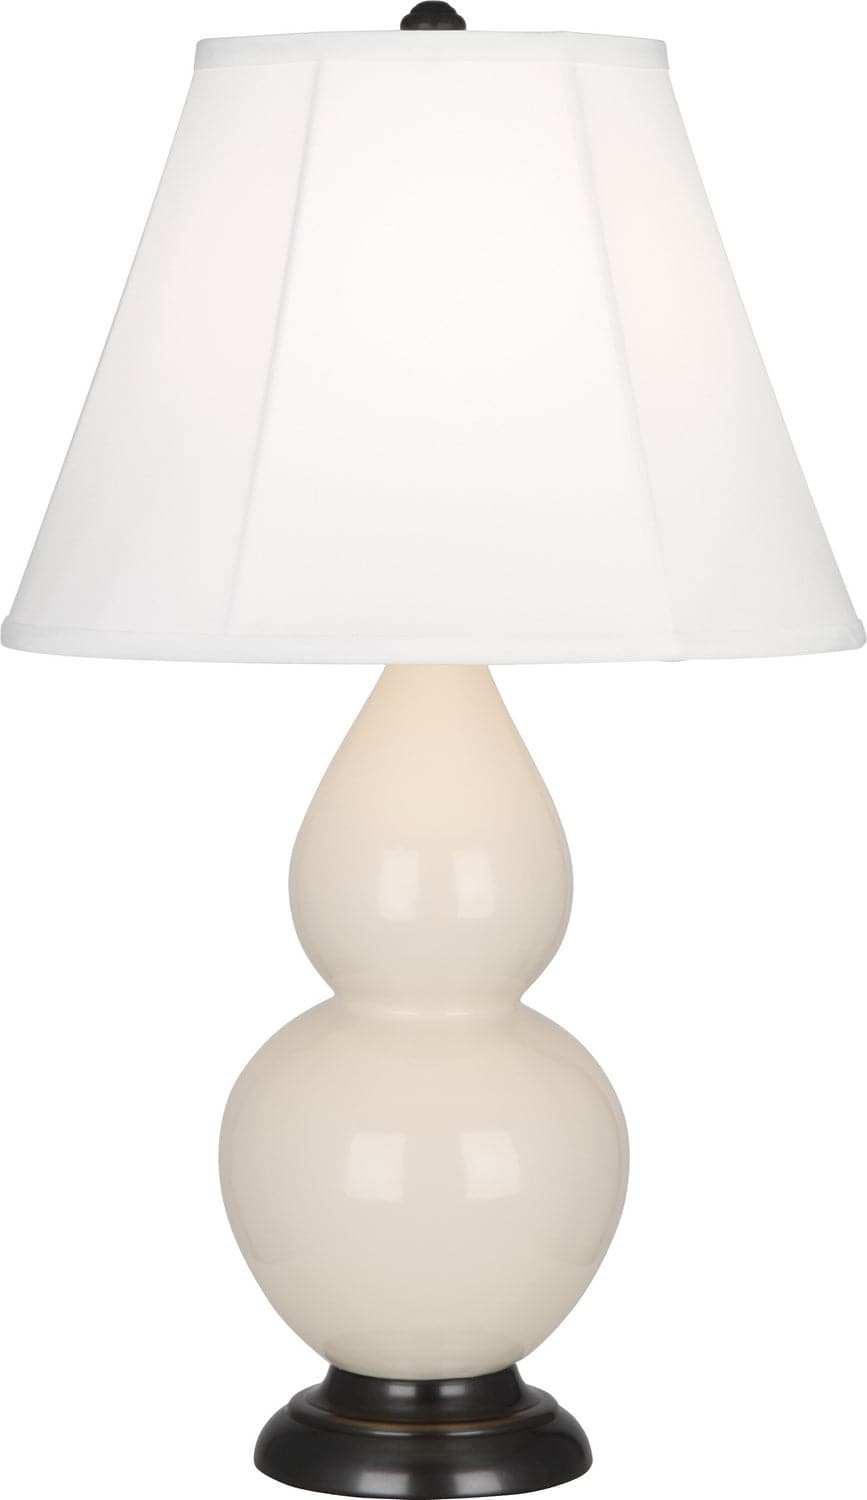 Robert Abbey - 1775 - One Light Accent Lamp - Small Double Gourd - Bone Glazed